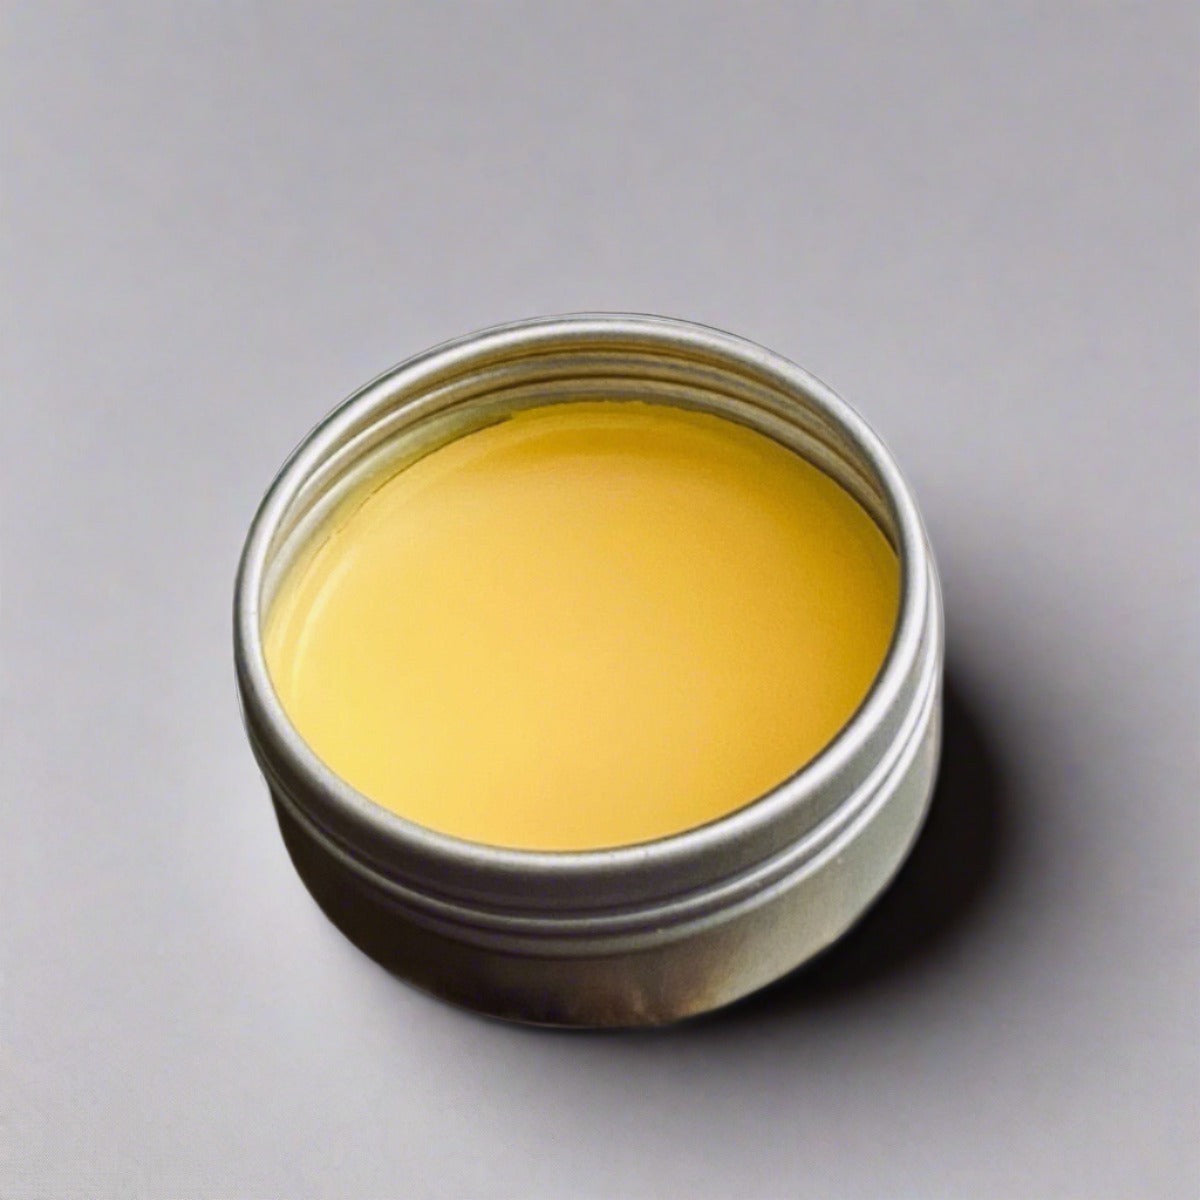 A tin of Billowing Fog Orange Butter Lip Balm: A natural plant-based solution for dry lips, providing a burst of hydration